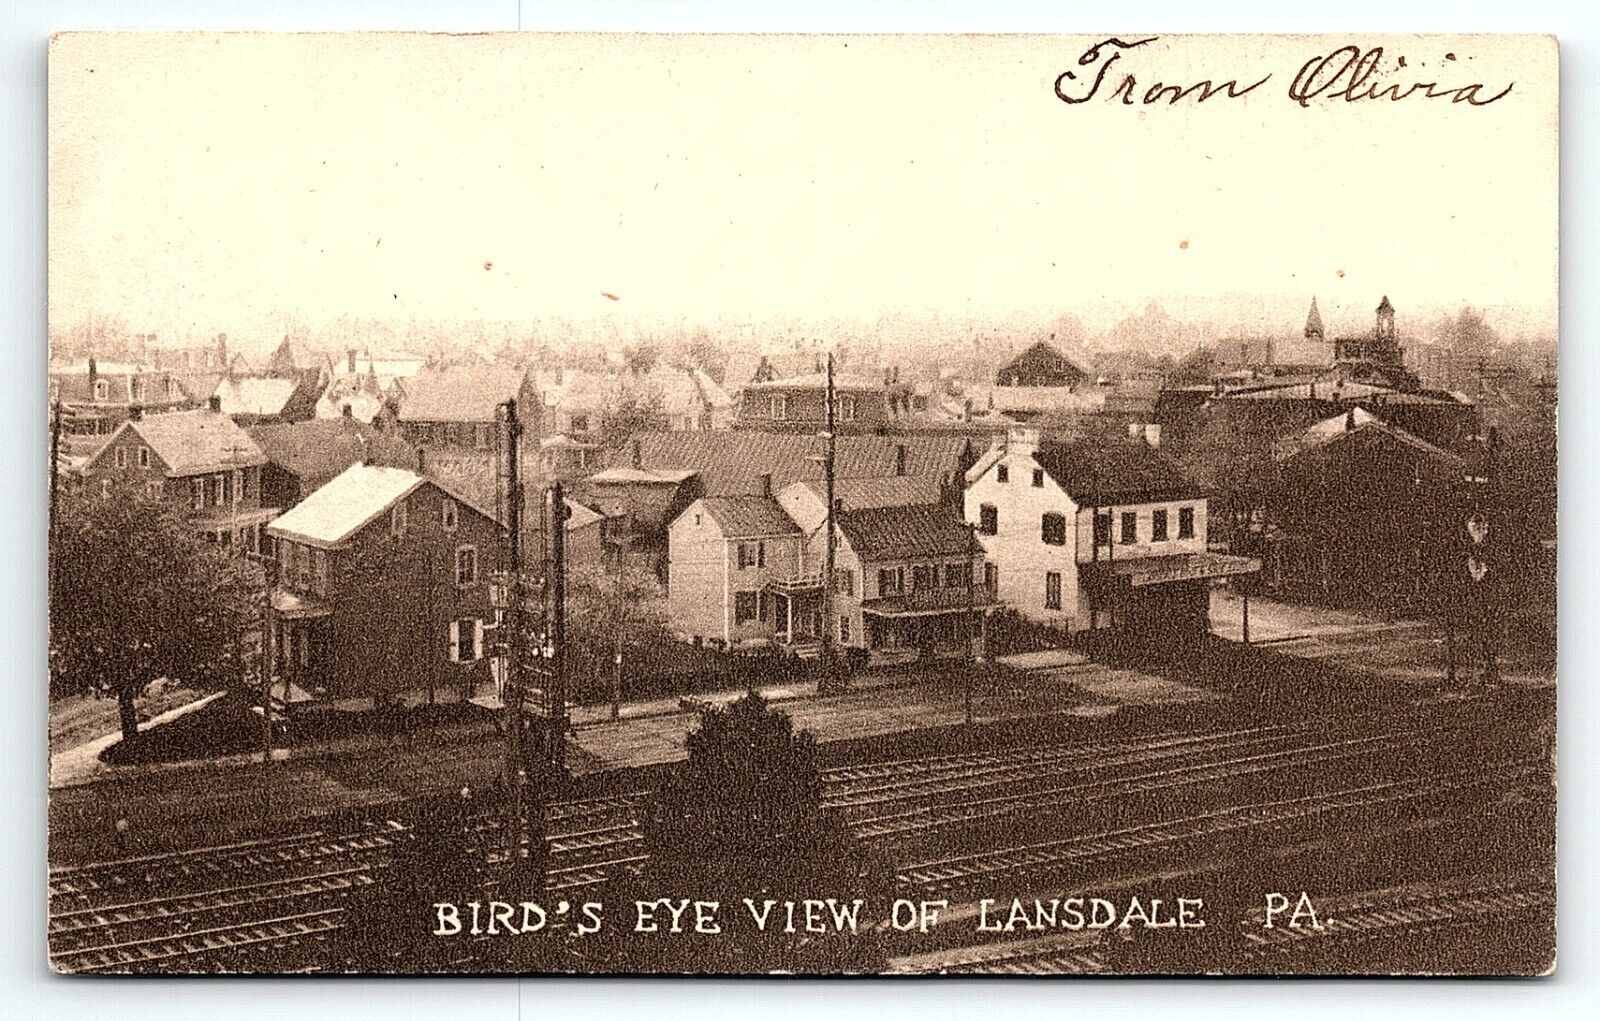 1906 LANSDALE PA BIRD'S EYE VIEW OF LANSDALE EARLY UNDIVIDED POSTCARD P3945